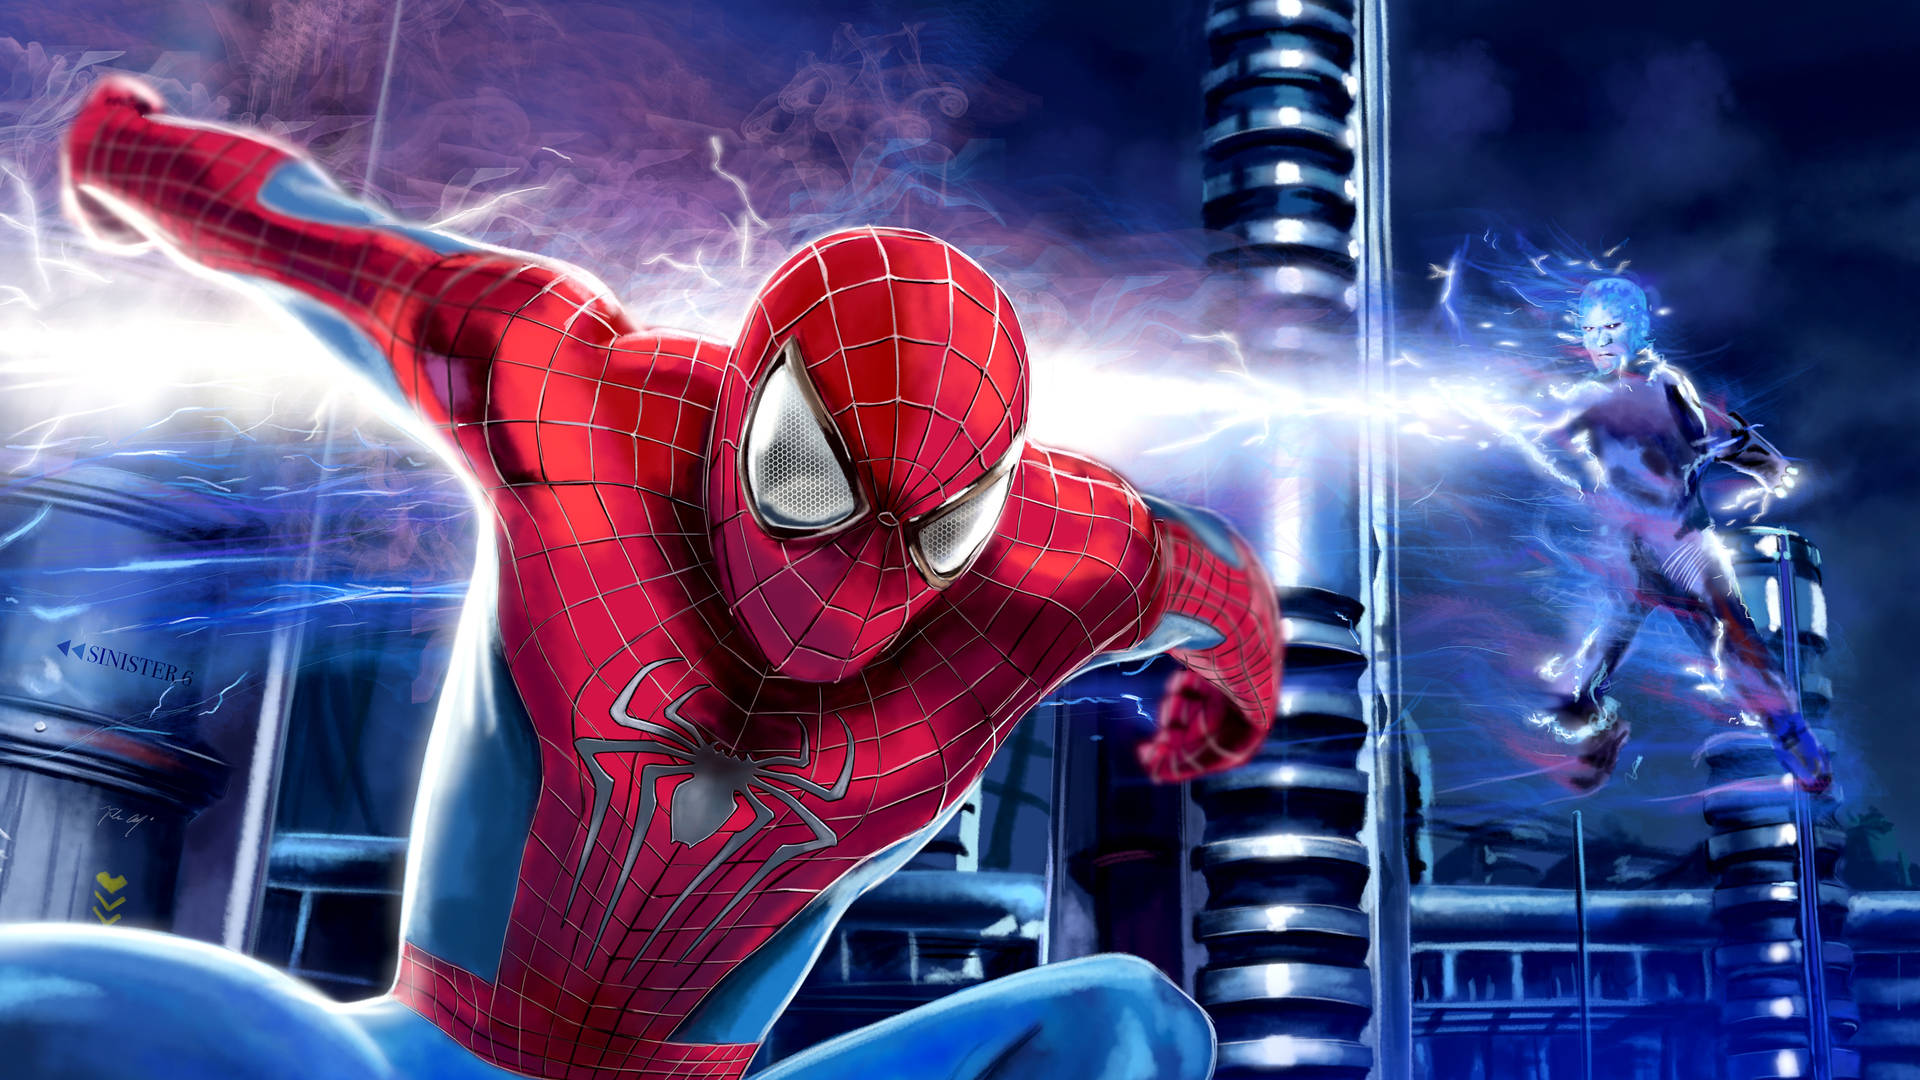 The Ultimate Super Hero - The Amazing Spider Man Wallpaper